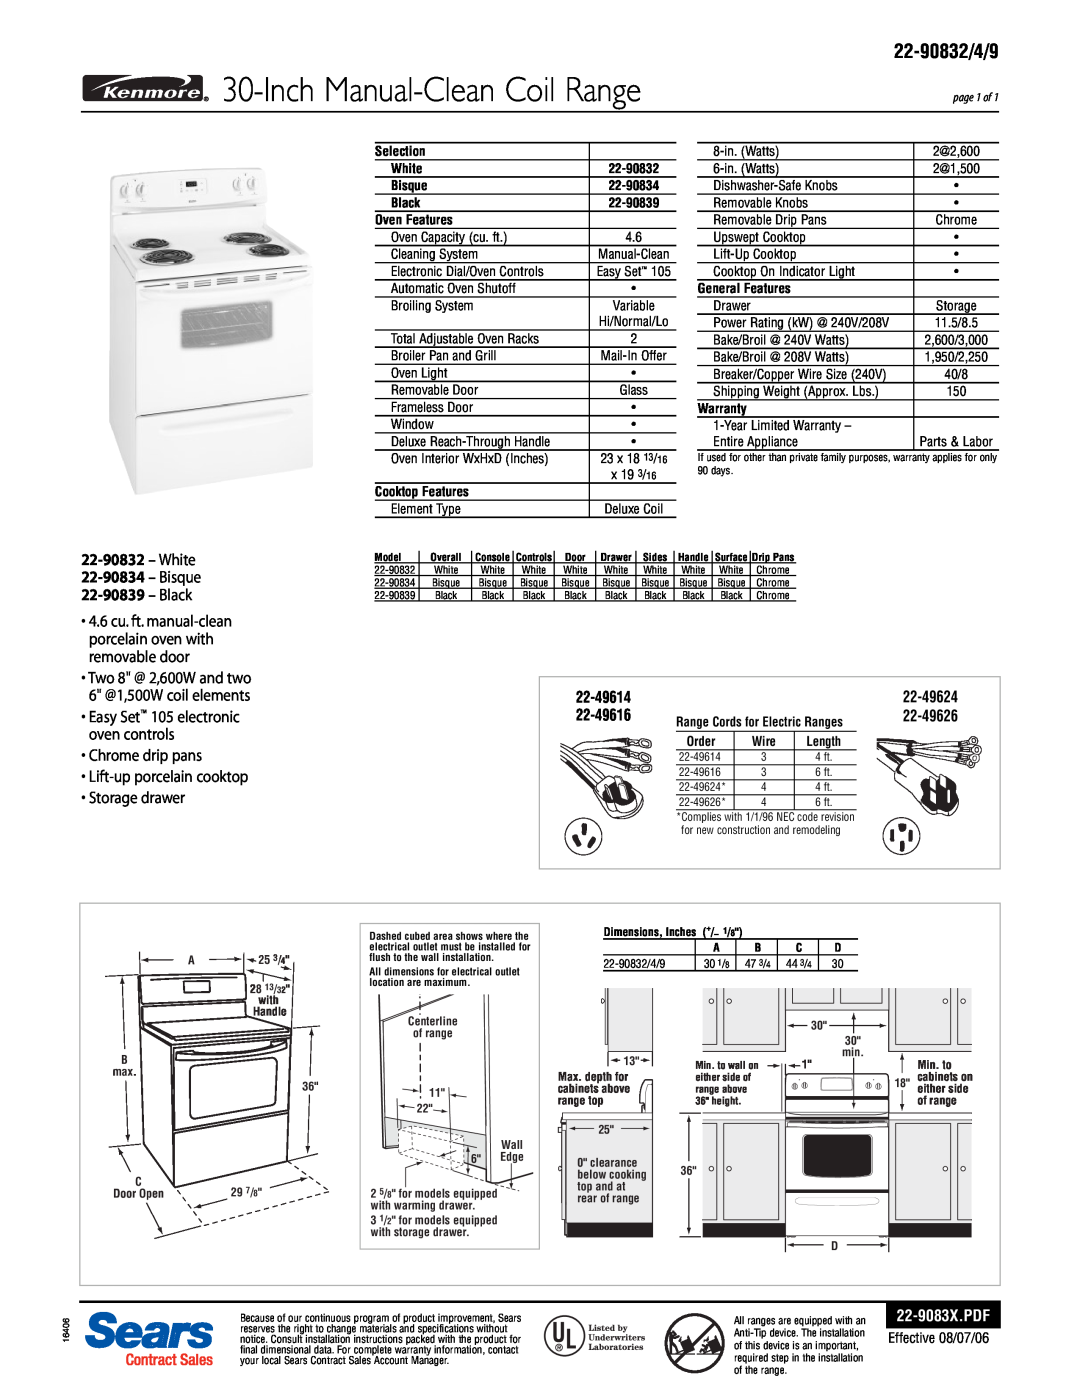 Sears specifications Inch Manual-Clean Coil Range, 22-90832/4/9, White 22-90834 - Bisque 22-90839 - Black, 22-49624 